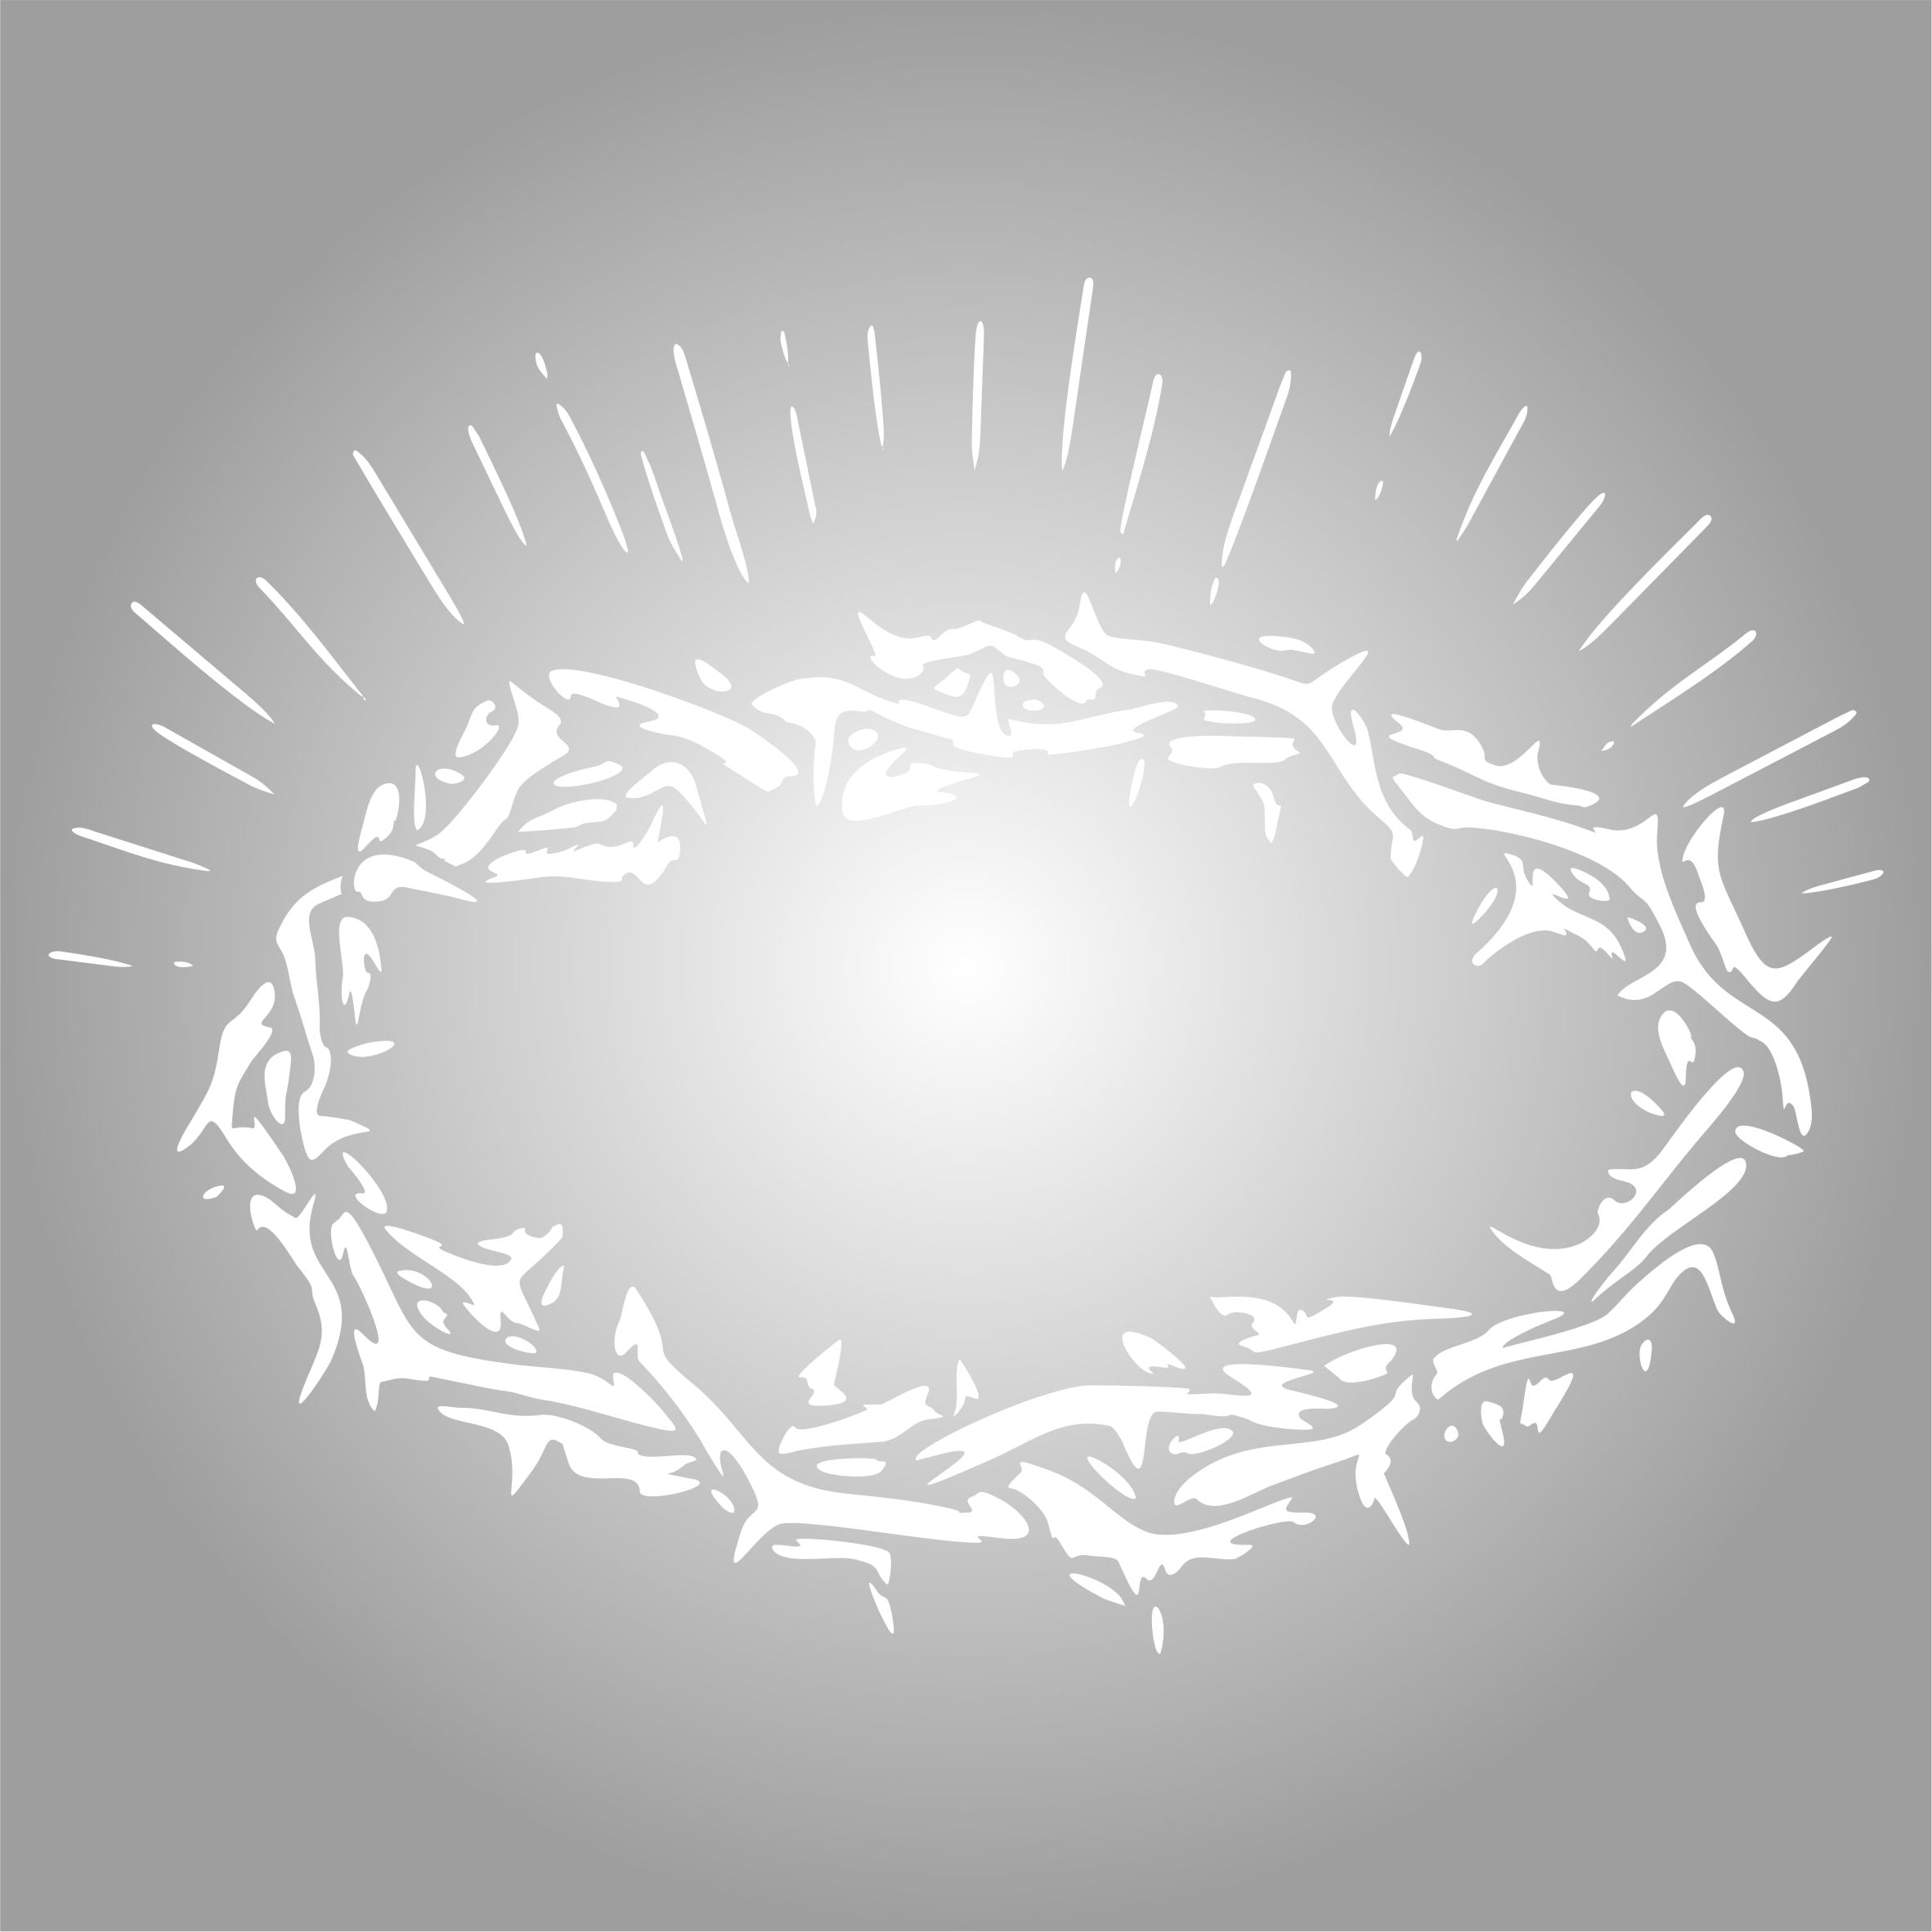 Crown of Thorns Stencil - Religious Woven Plaited Jesus Crown Wreath